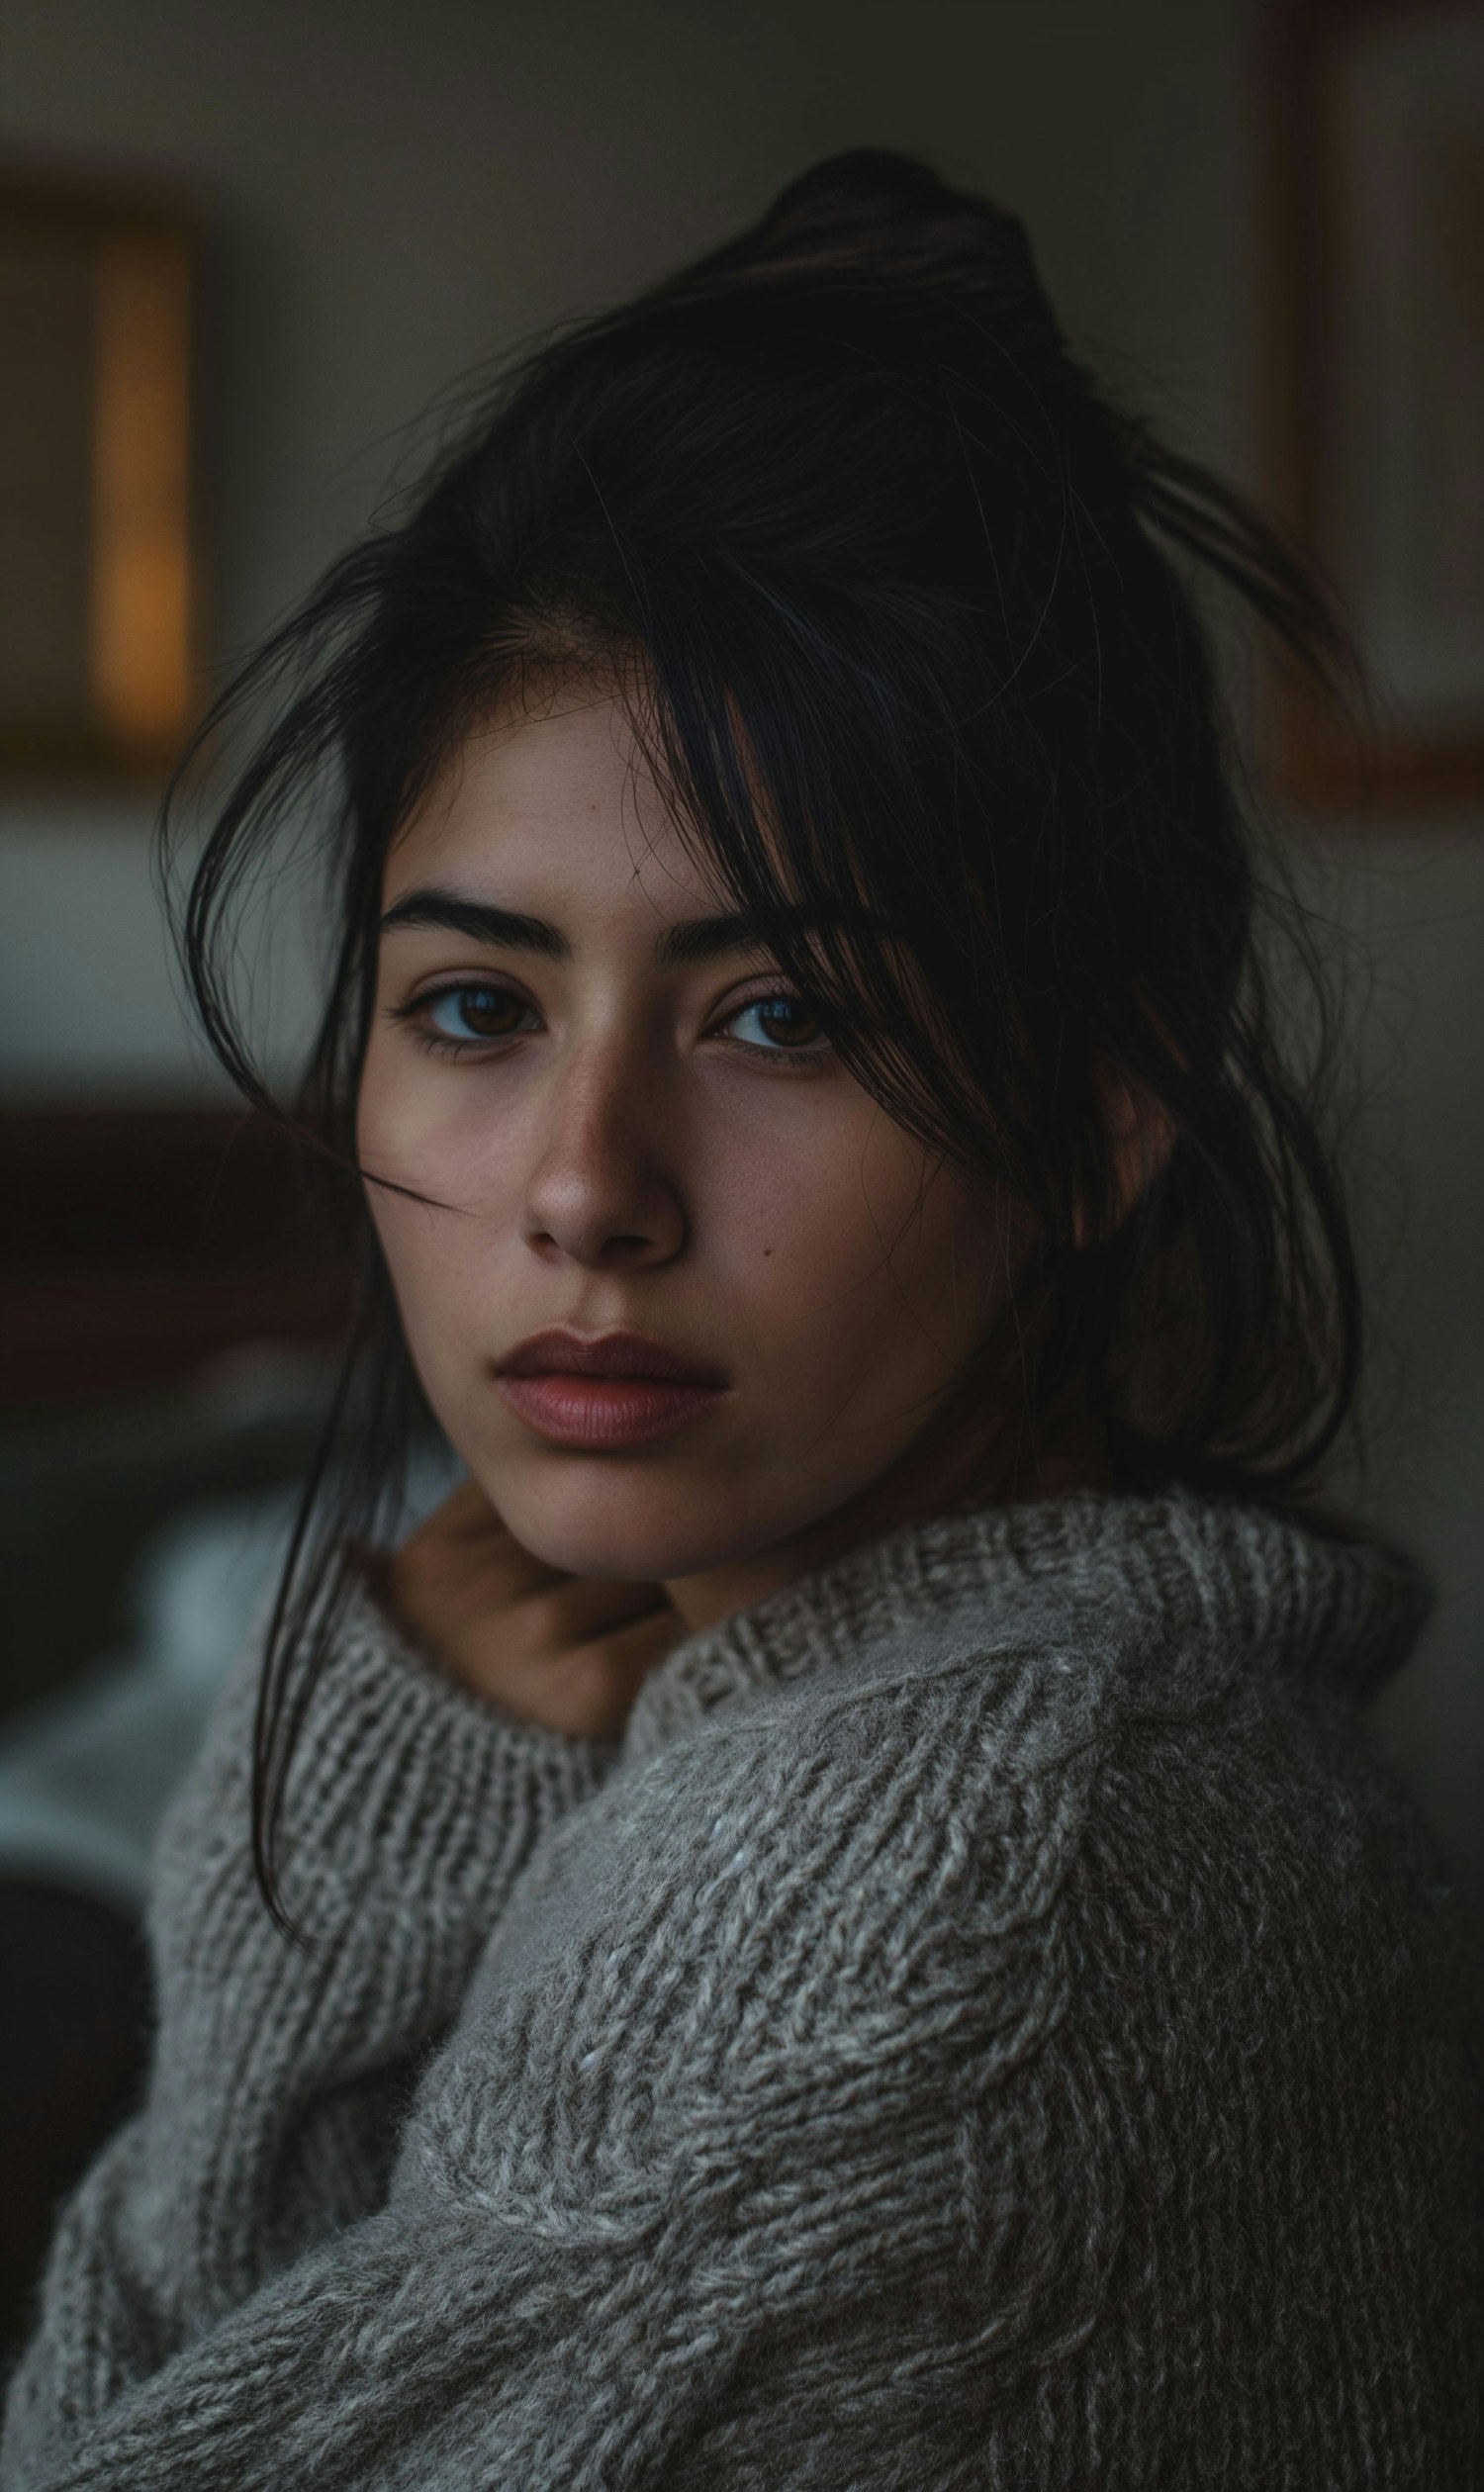 Young Woman with Thoughtful Expression